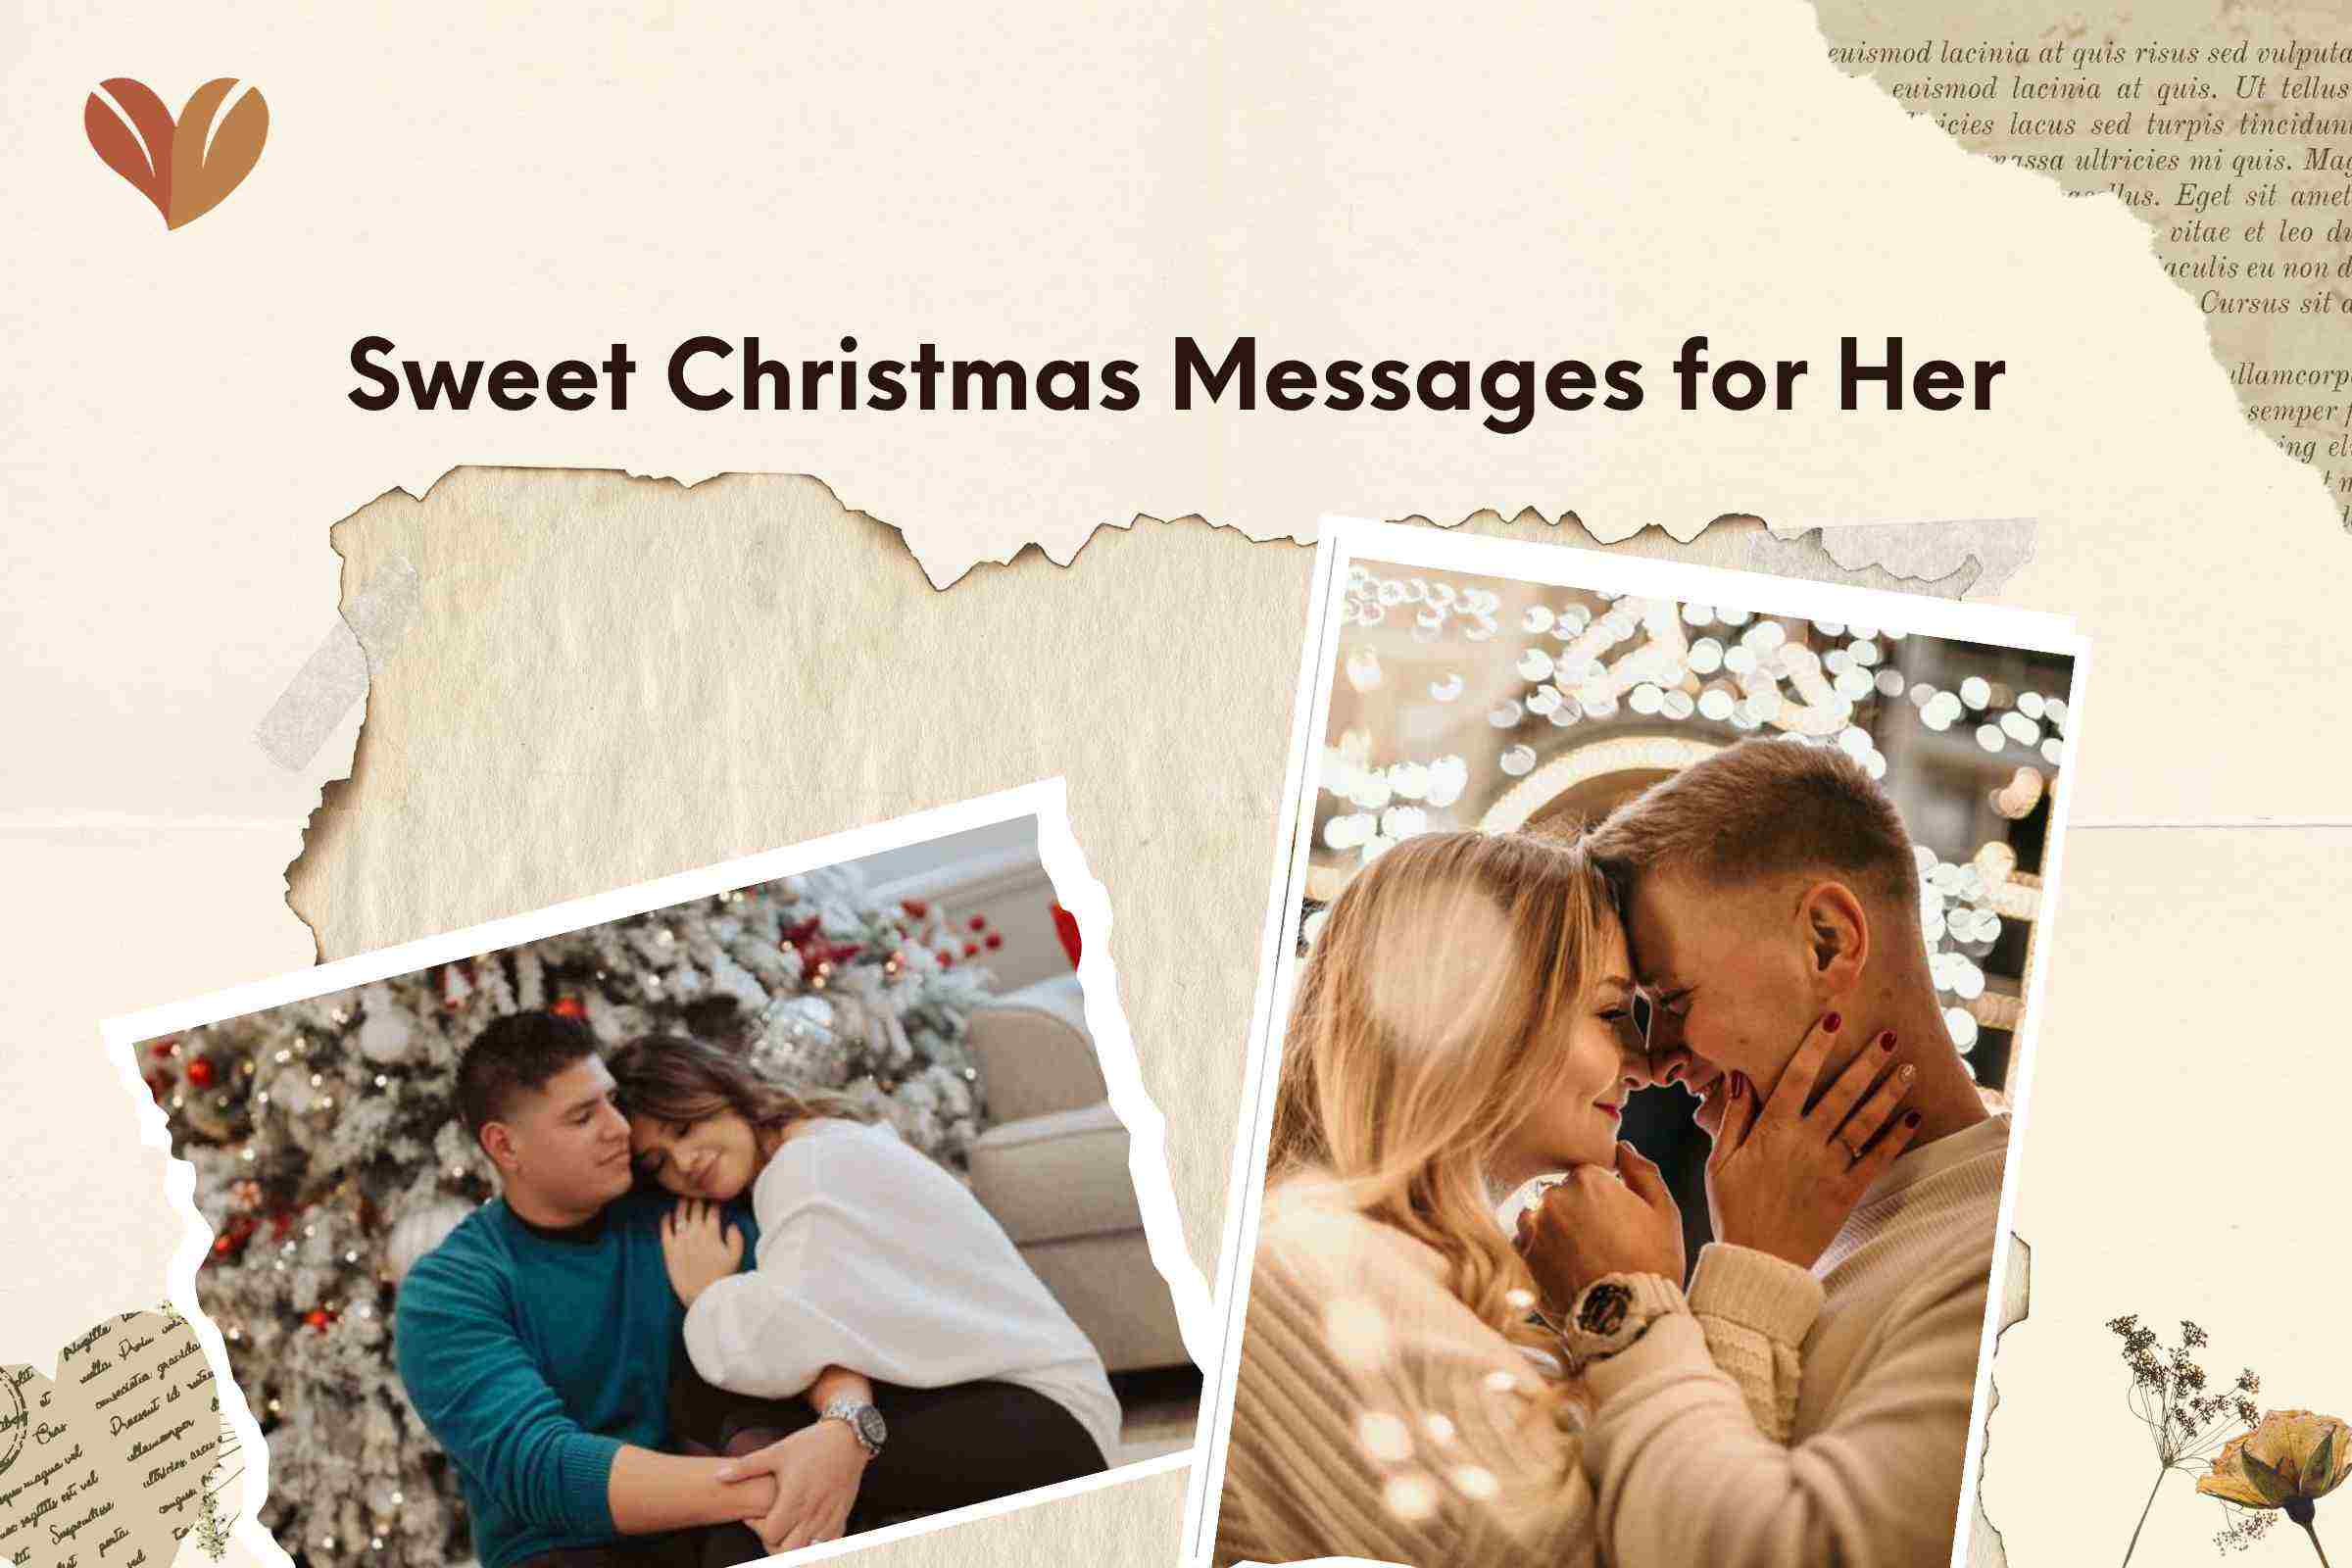 Sweet Christmas Messages for Her